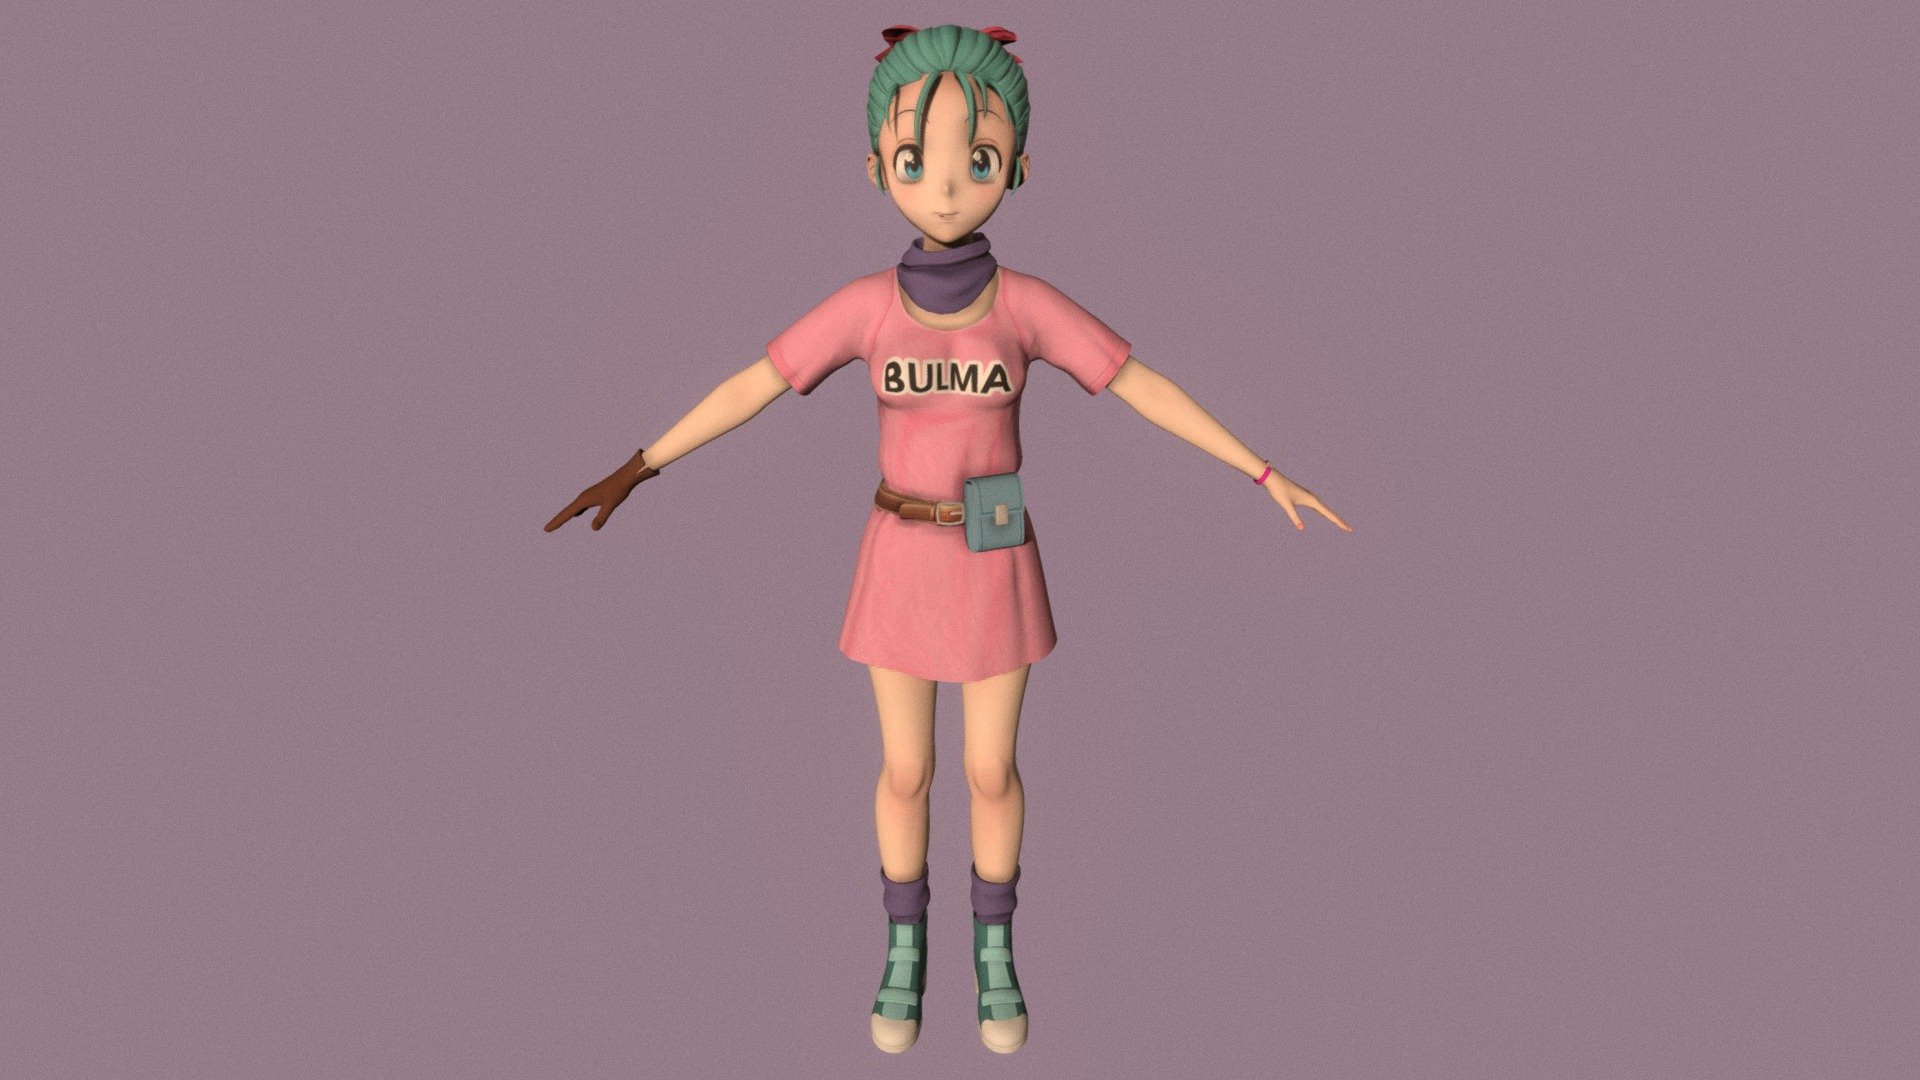 T-pose rigged model of anime girl Bulma (Dragon Ball).

Body and clothings are rigged and skinned by 3ds Max CAT system.

Eye direction and facial animation controlled by Morpher modifier / Shape Keys / Blendshape.

This product include .FBX (ver. 7200) and .MAX (ver. 2010) files.

3ds Max version is turbosmoothed to give a high quality render (as you can see here).

Original main body mesh have ~7.000 polys.

This 3D model may need some tweaking to adapt the rig system to games engine and other platforms.

I support convert model to various file formats (the rig data will be lost in this process): 3DS; AI; ASE; DAE; DWF; DWG; DXF; FLT; HTR; IGS; M3G; MQO; OBJ; SAT; STL; W3D; WRL; X.

You can buy all of my models in one pack to save cost: https://sketchfab.com/3d-models/all-of-my-anime-girls-c5a56156994e4193b9e8fa21a3b8360b

And I can make commission models.

If you have any questions, please leave a comment or contact me via my email 3d.eden.project@gmail.com 3d model